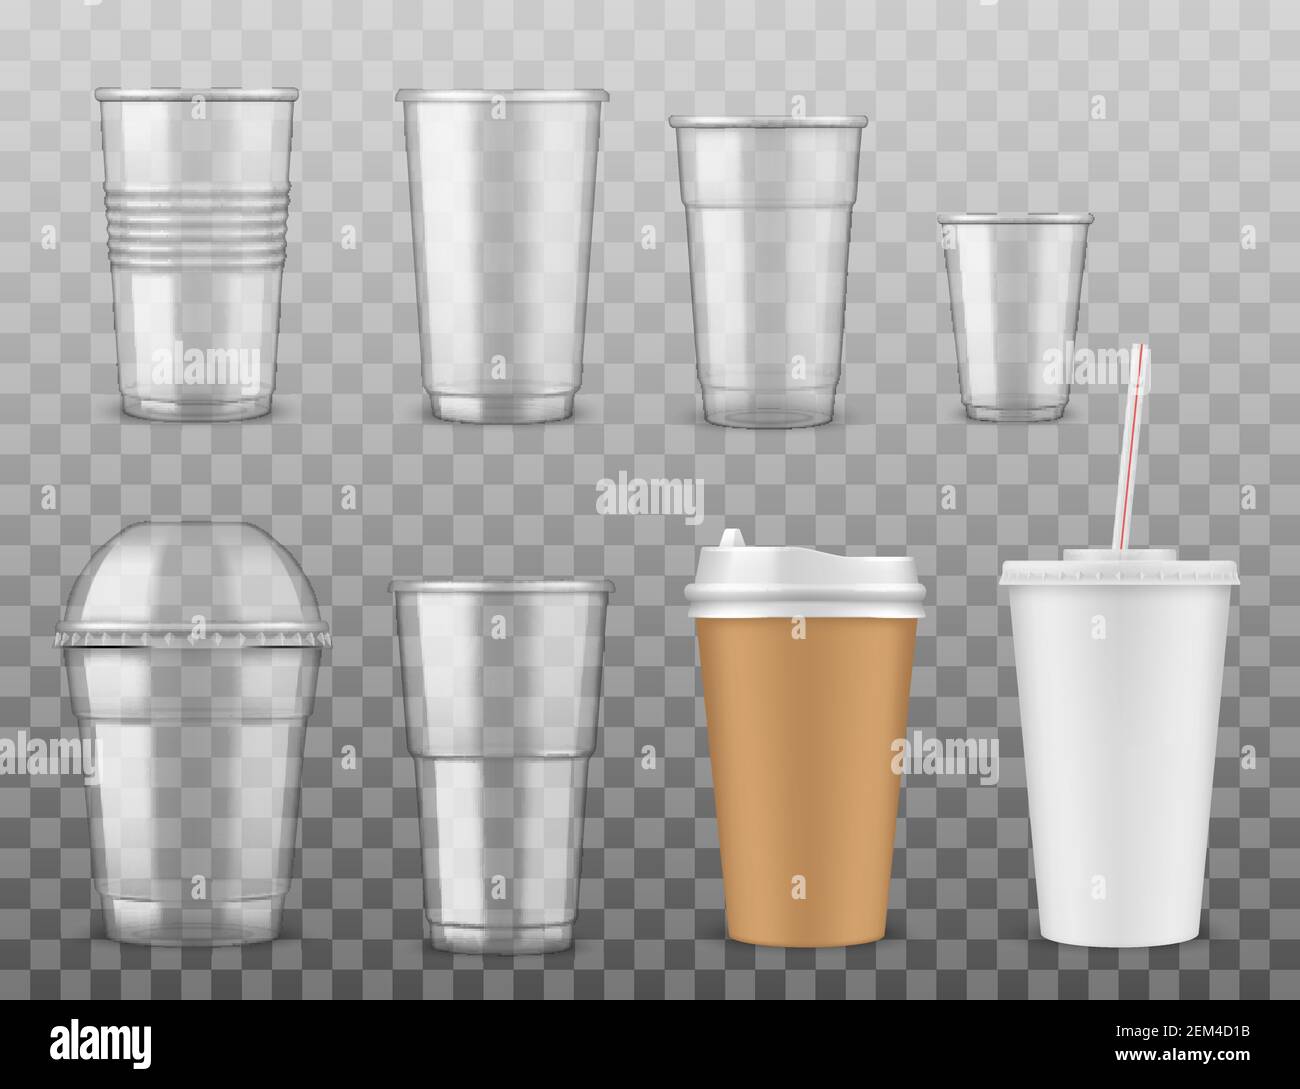 https://c8.alamy.com/comp/2EM4D1B/empty-disposable-plastic-or-paper-cups-with-cover-and-straw-isolated-on-transparent-vector-takeaway-coffee-cup-containers-to-pour-cold-and-hot-drink-2EM4D1B.jpg